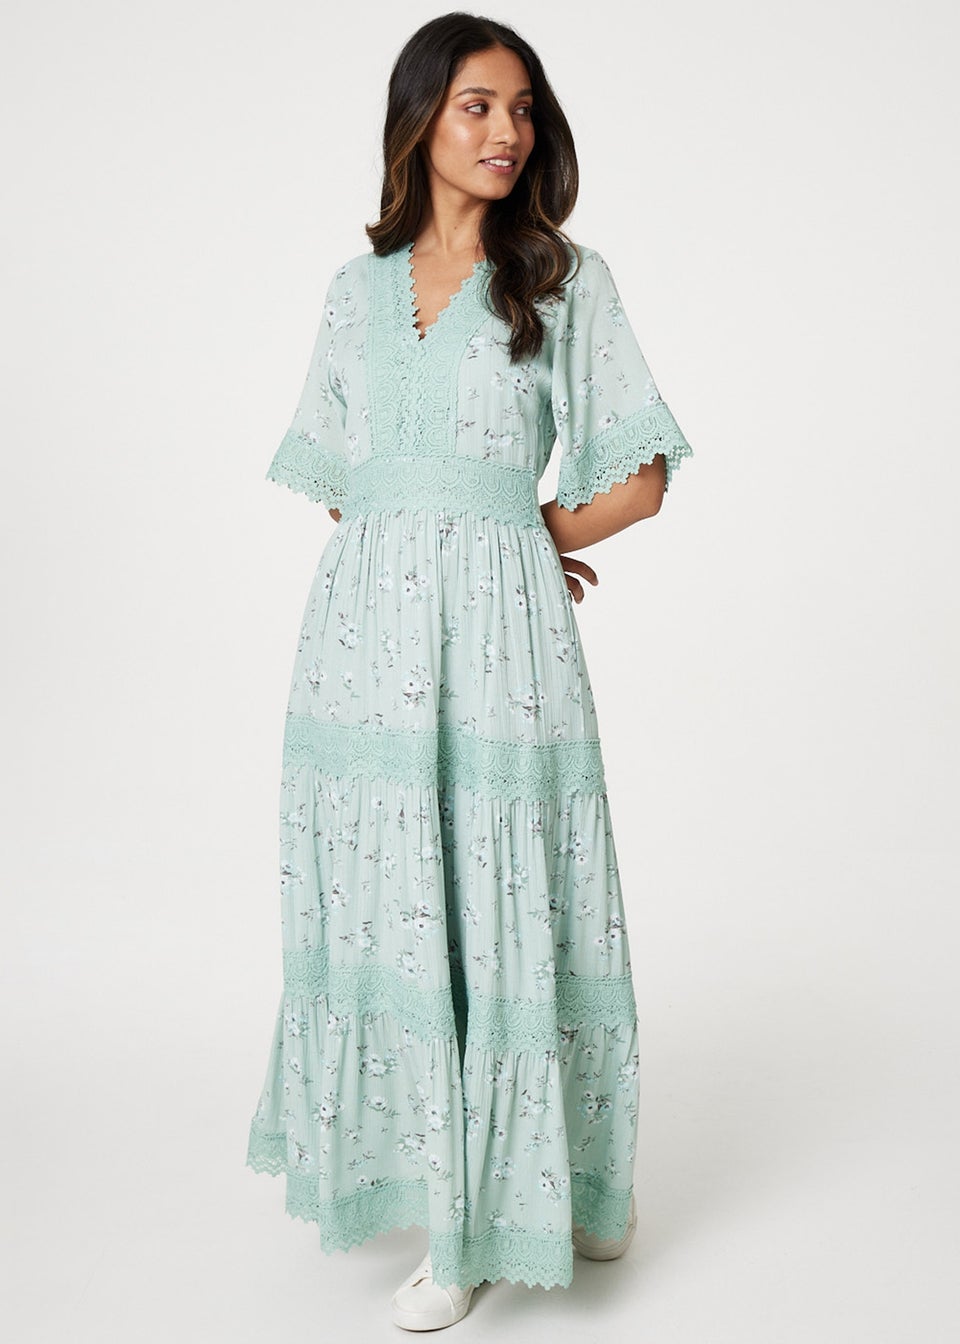 Izabel London Soft Green Floral Lace Tiered Maxi Dress